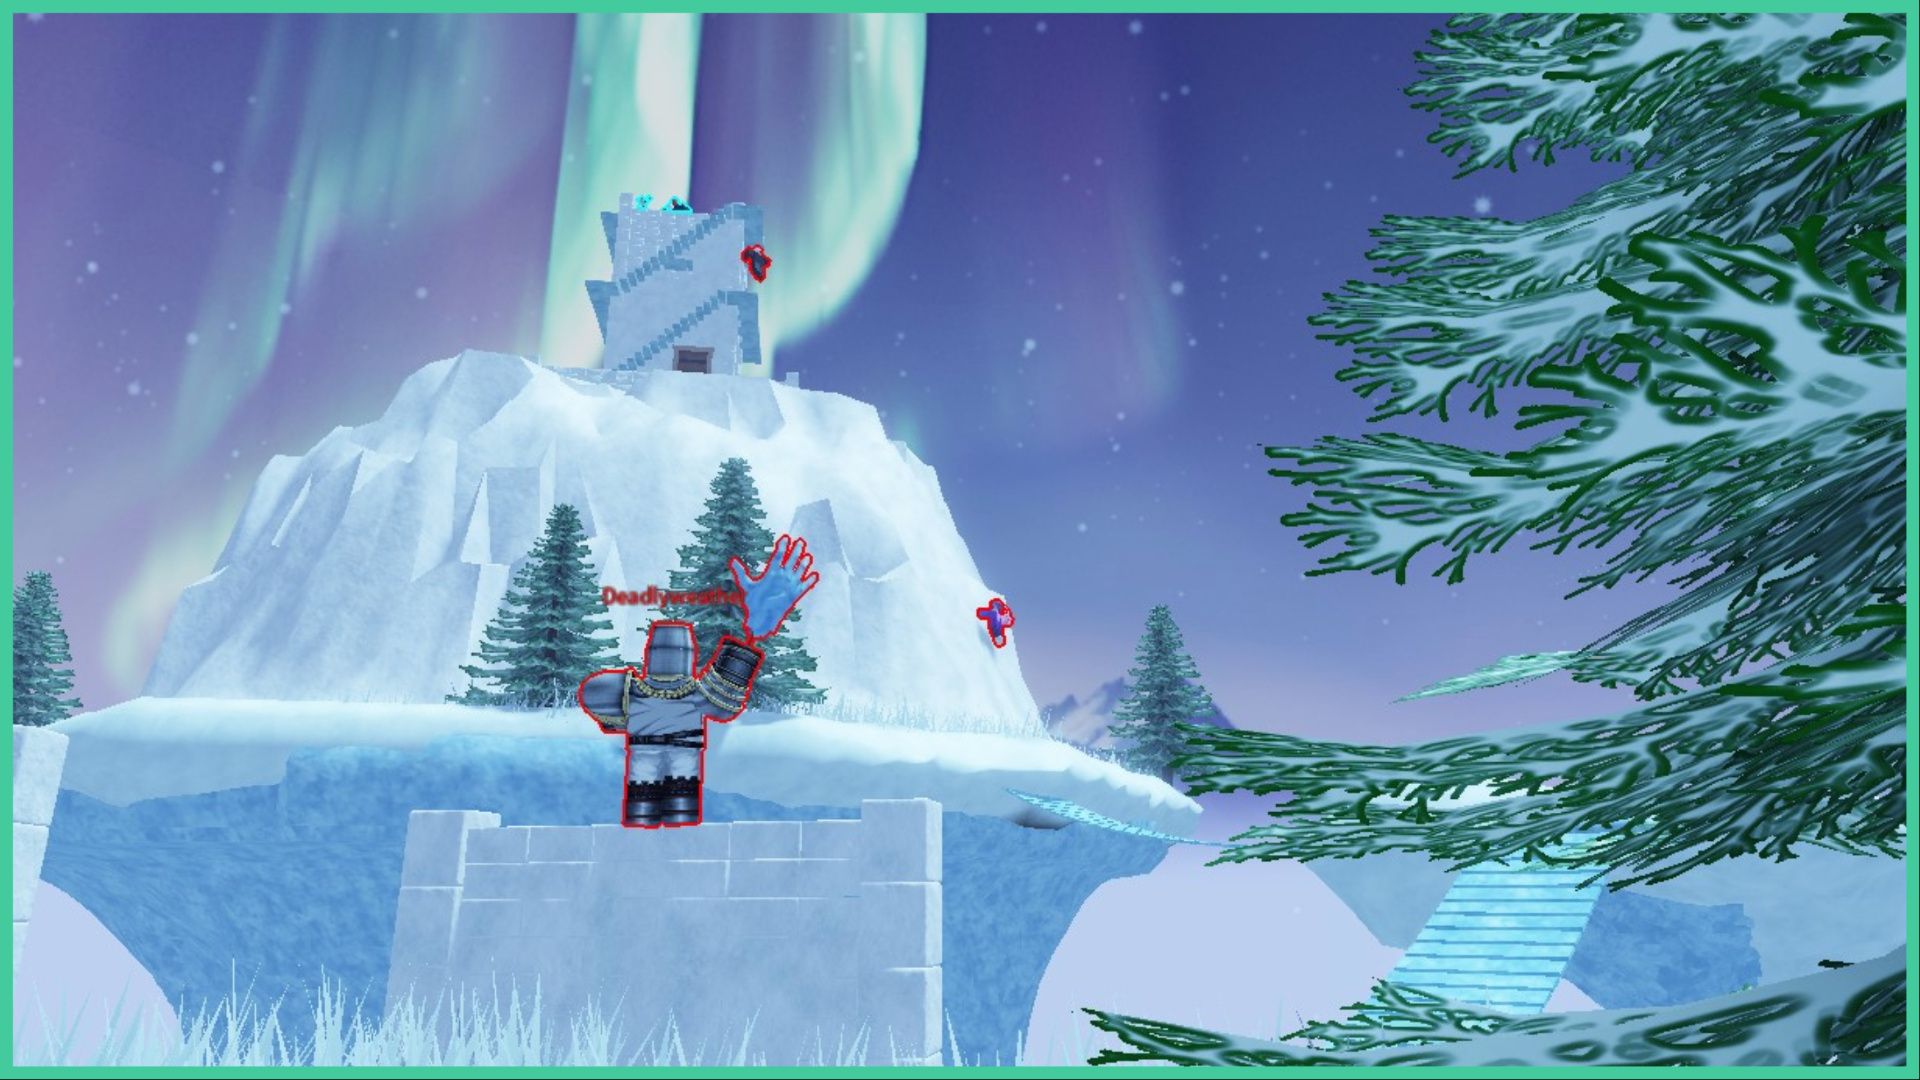 feature iamge for our slap battles santa glove guide, the image features a screenshot from the christmas event of the snowball smash challenge as players stand on top of forts to throw snowballs at eachother as the northern lights shine in the sky, the entire area is surrounded by trees covered in snow